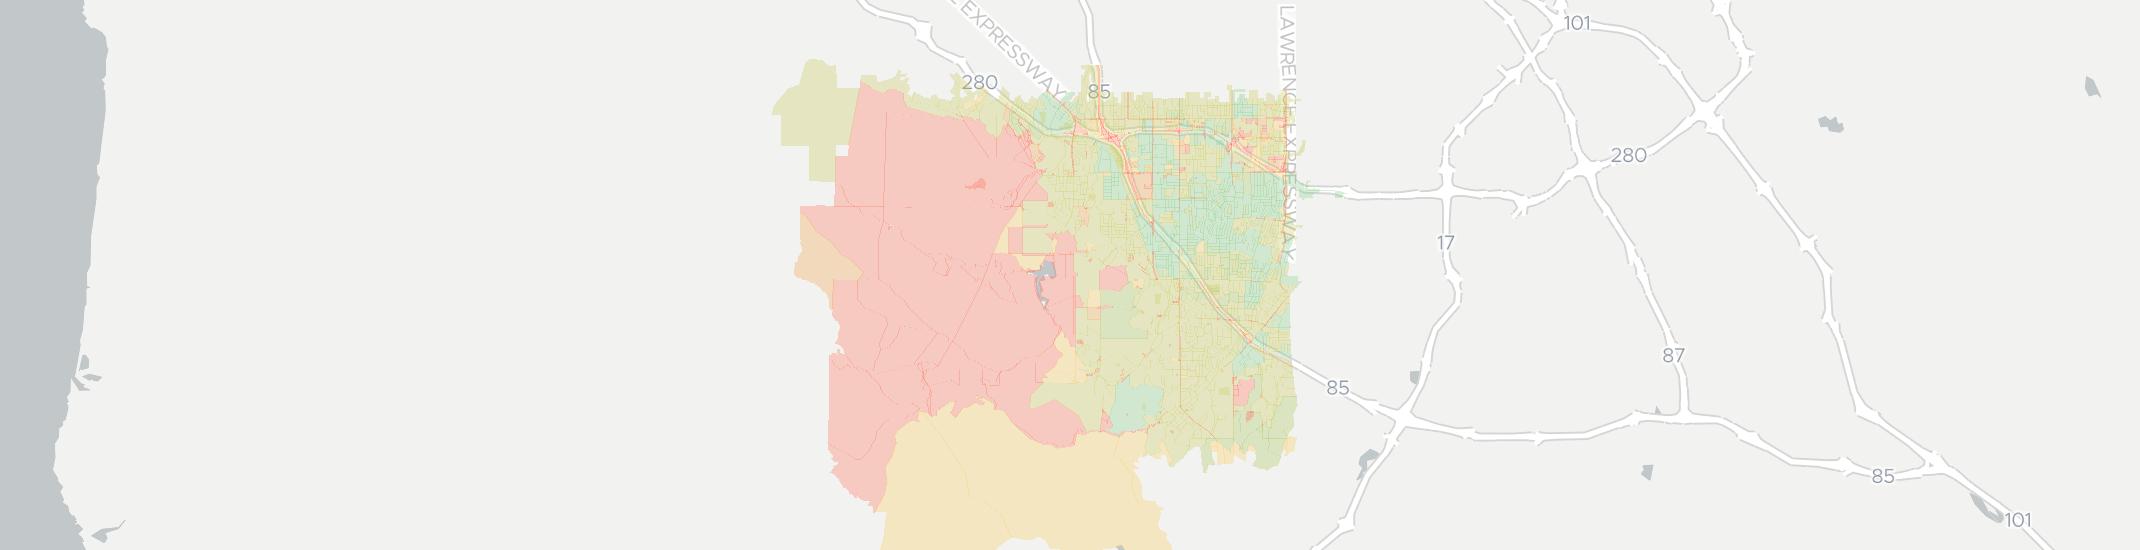 Cupertino Internet Competition Map. Click for interactive map